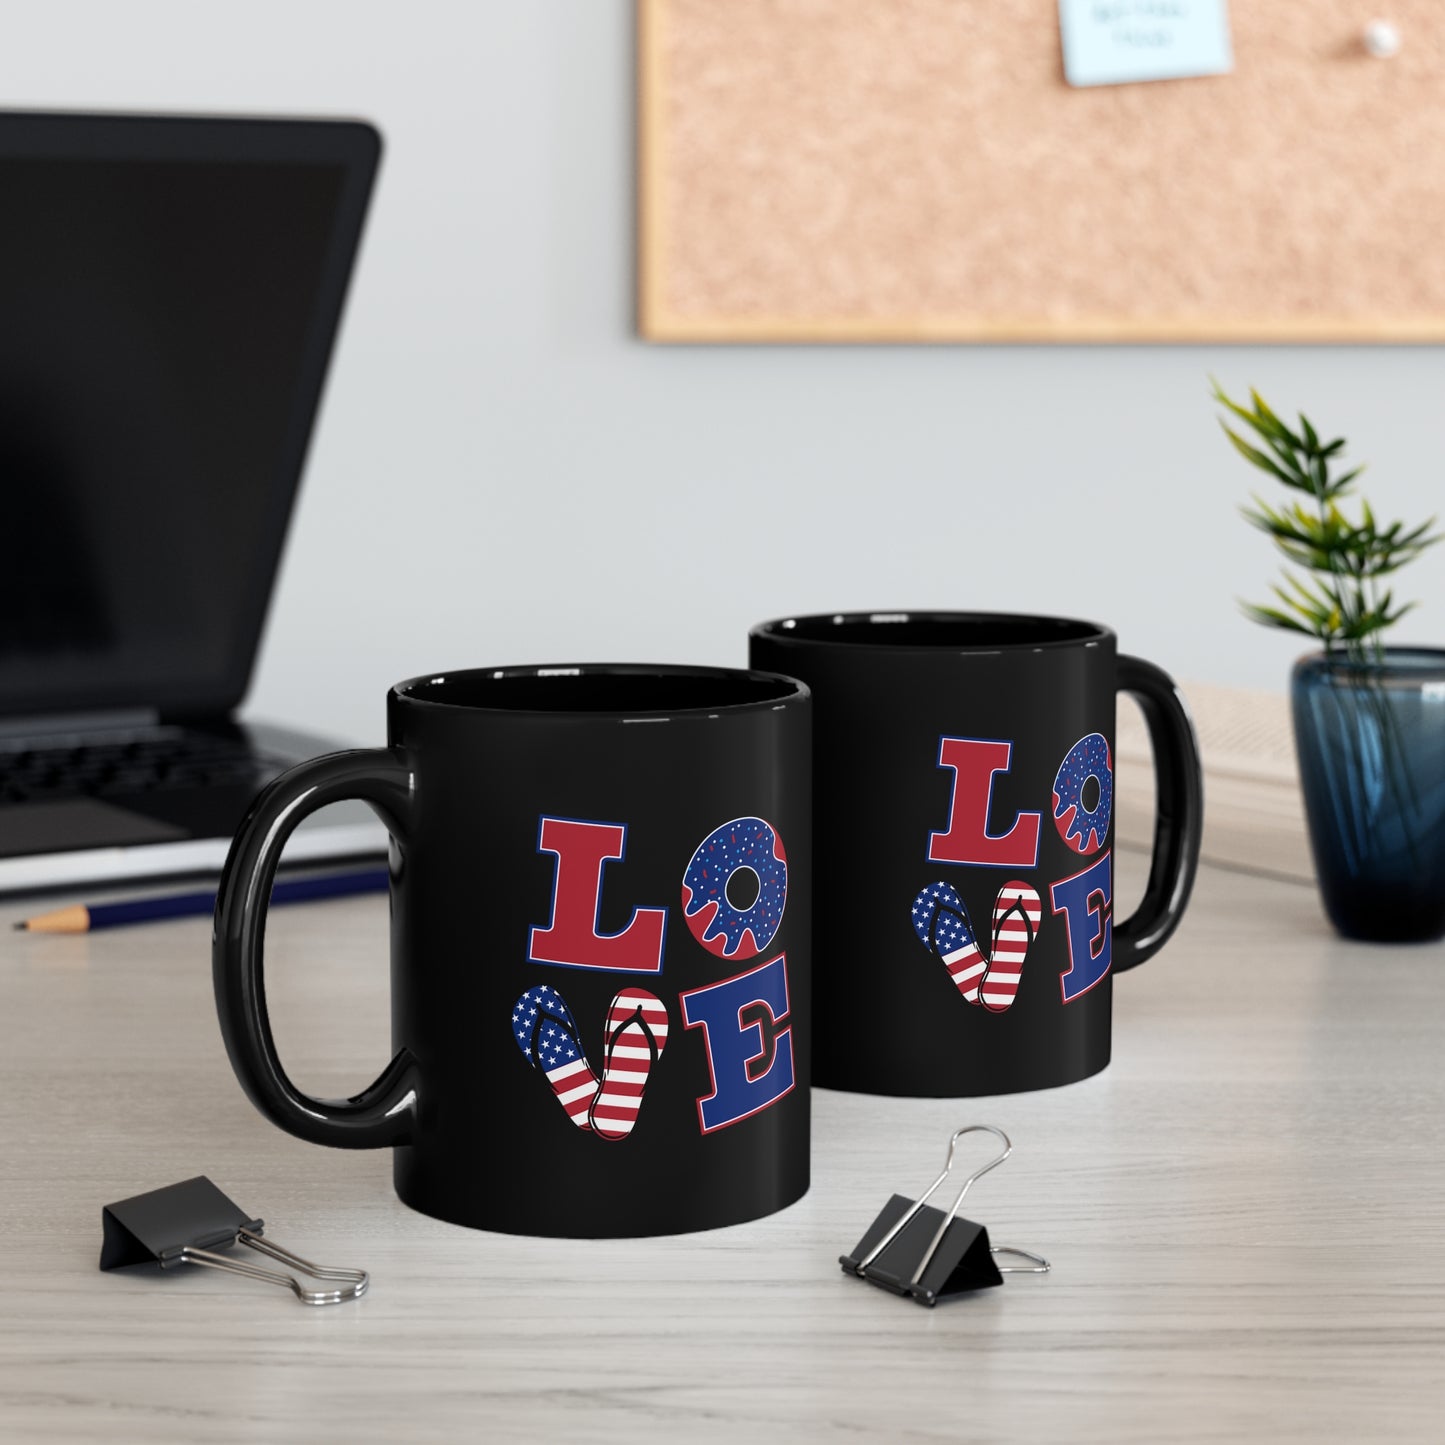 Patriotic American USA Love Wrap Around Graphics On Black glossy 11 Oz Mug Fourth of July Father's Day Veterans Home or Boat Party